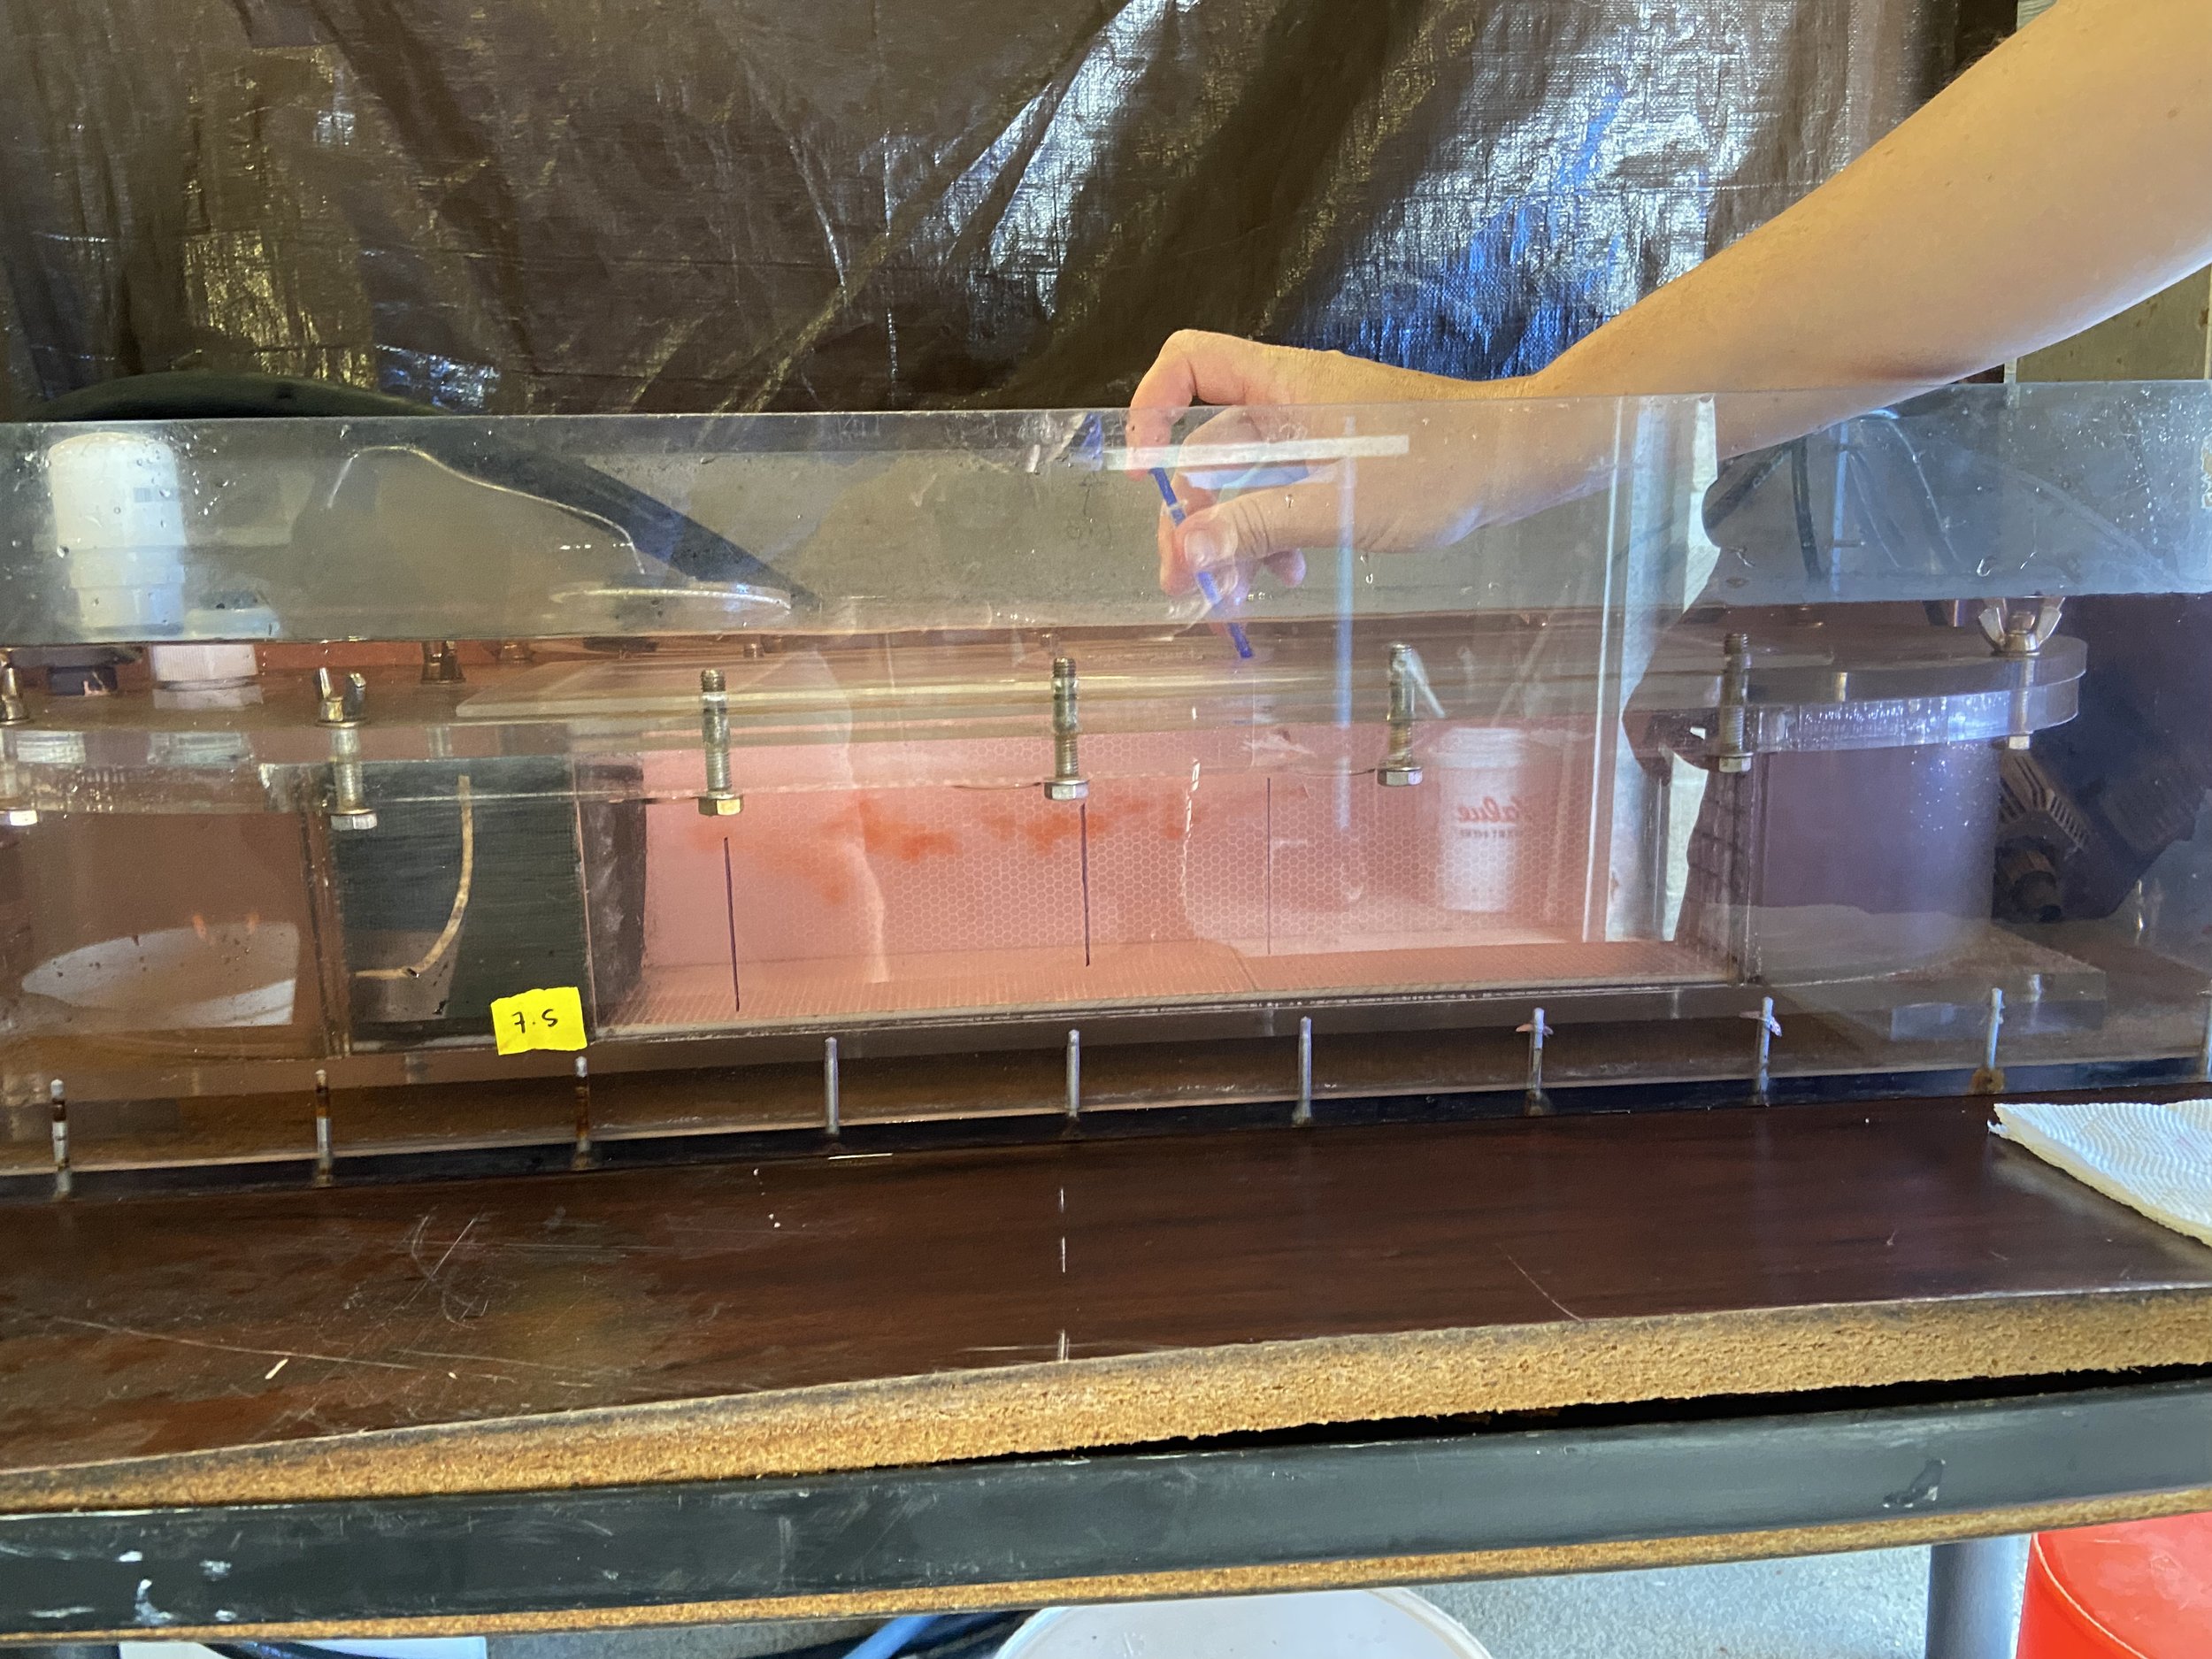  Testing the swimming capacity of silverside juveniles at the Rankin Lab at the University of Connecticut - Avery Point 